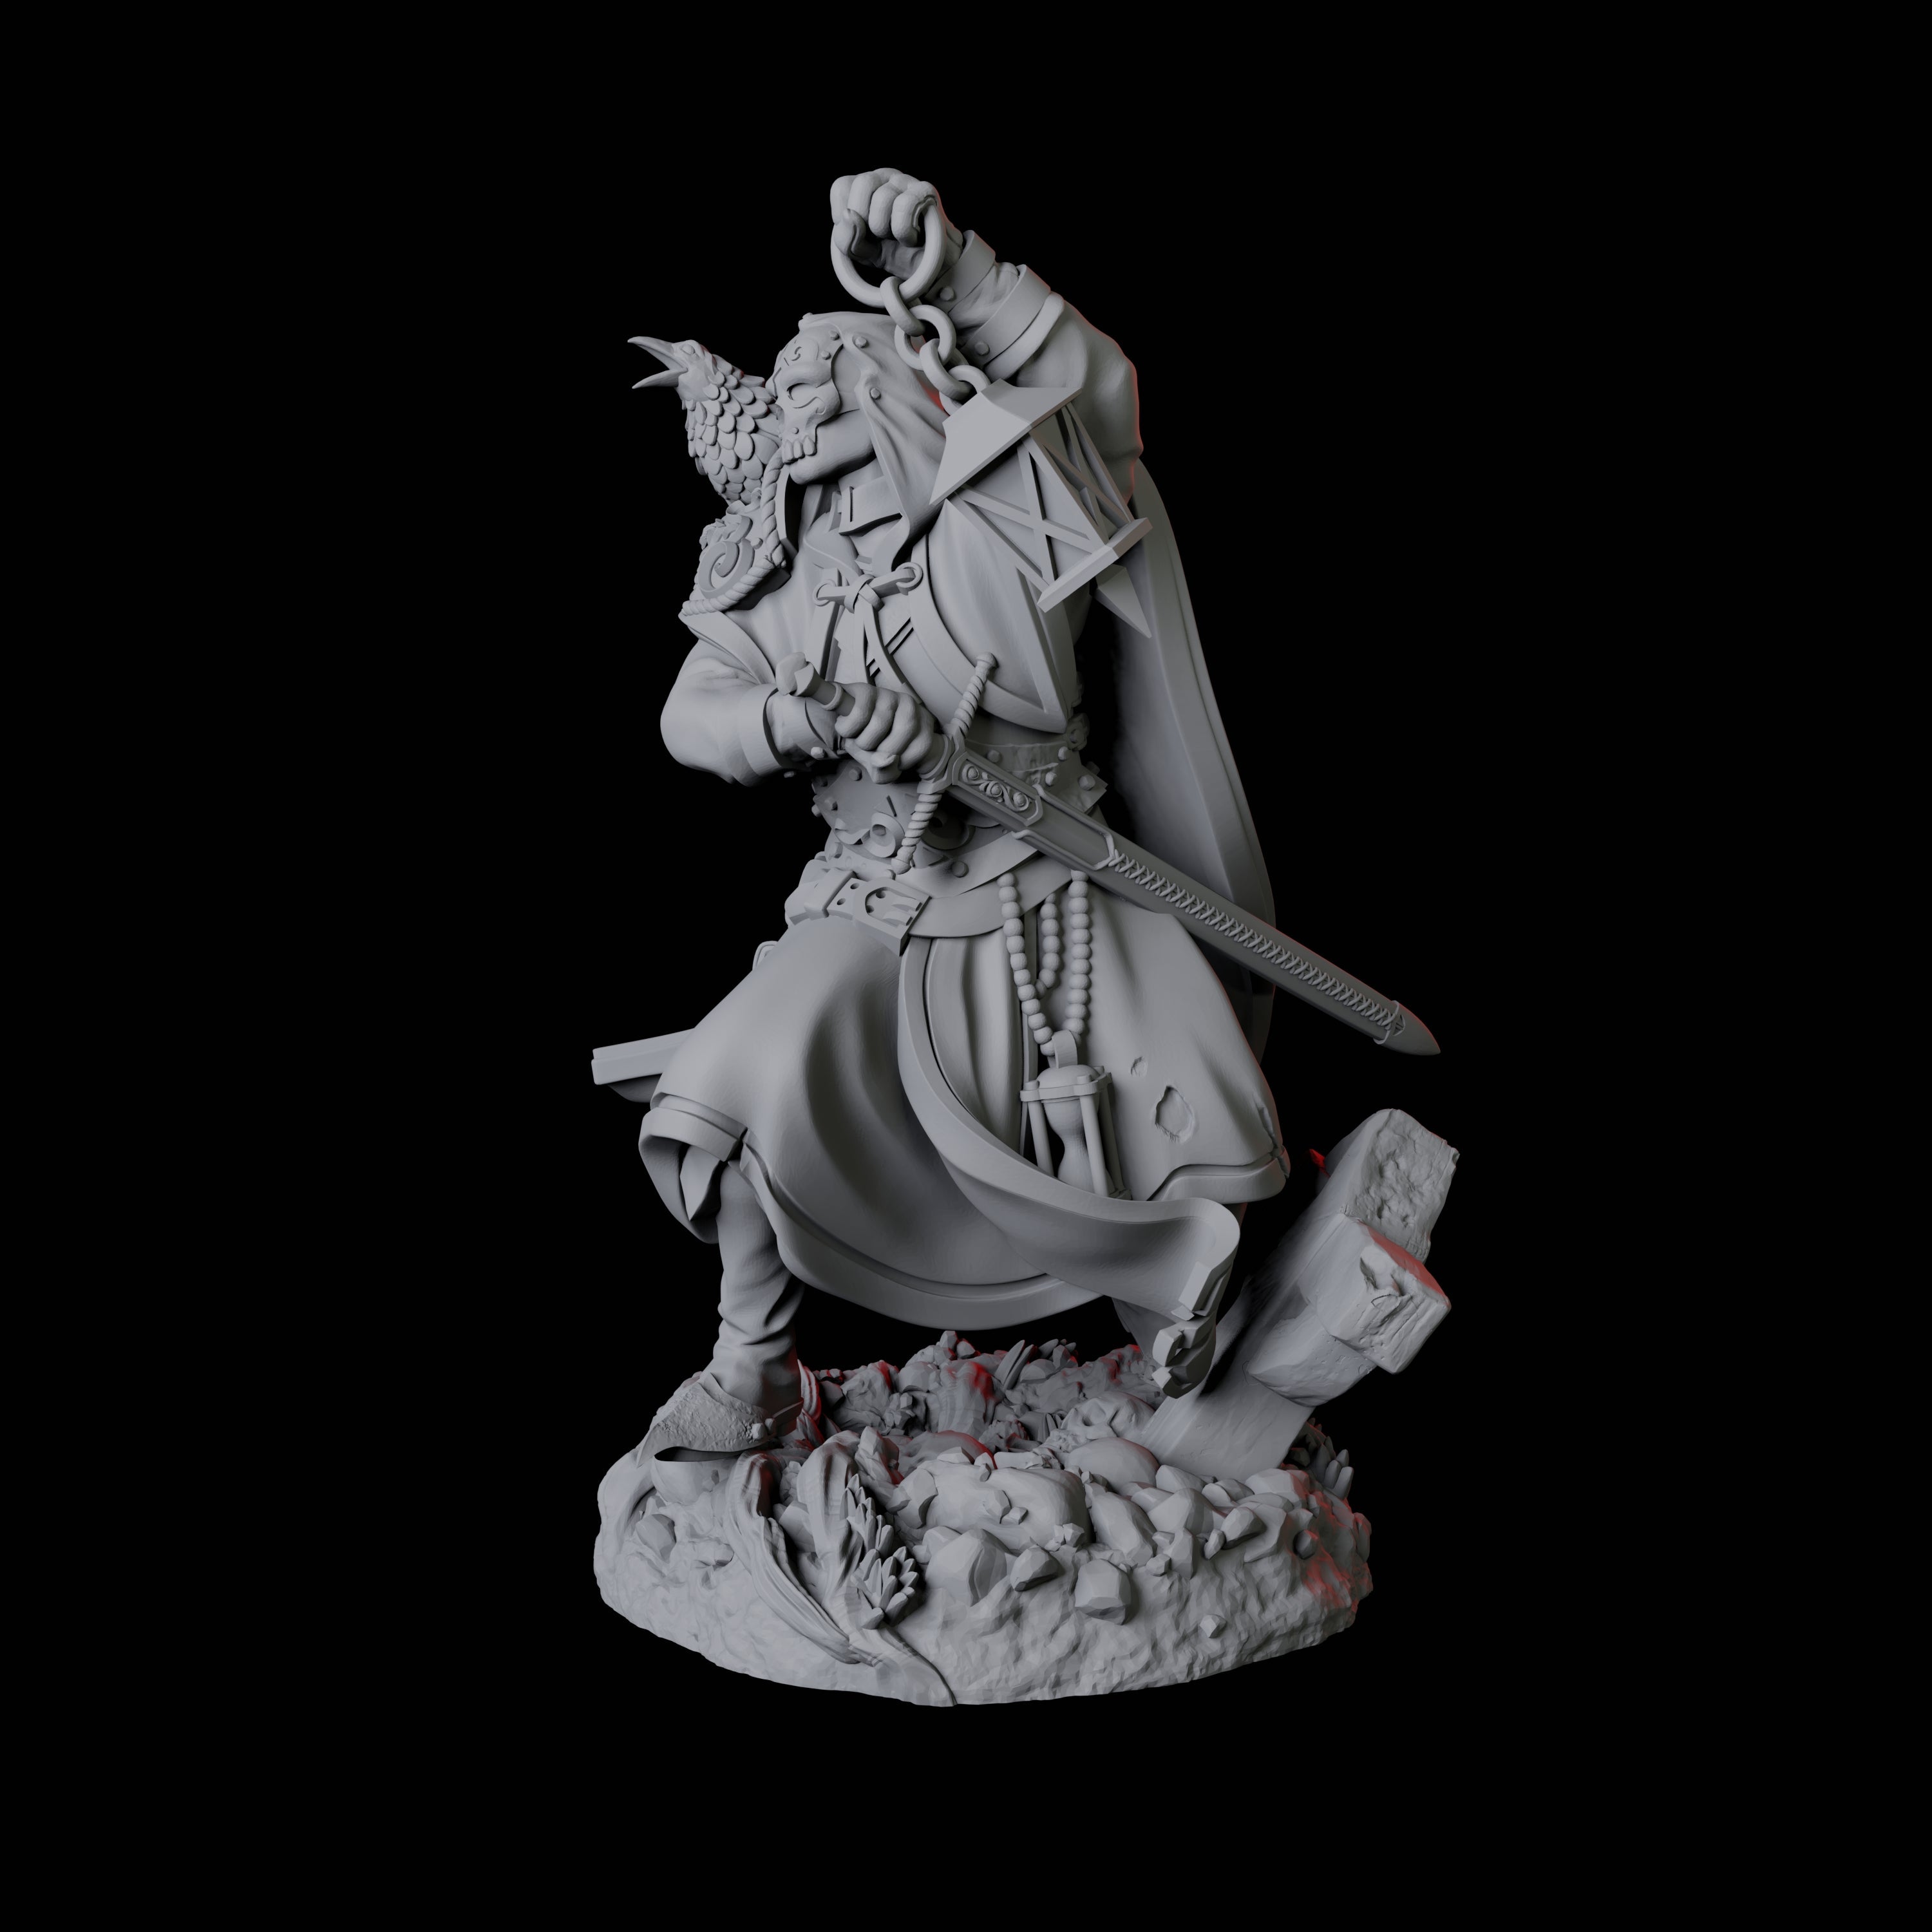 Creepy Gravedigger D Miniature for Dungeons and Dragons, Pathfinder or other TTRPGs